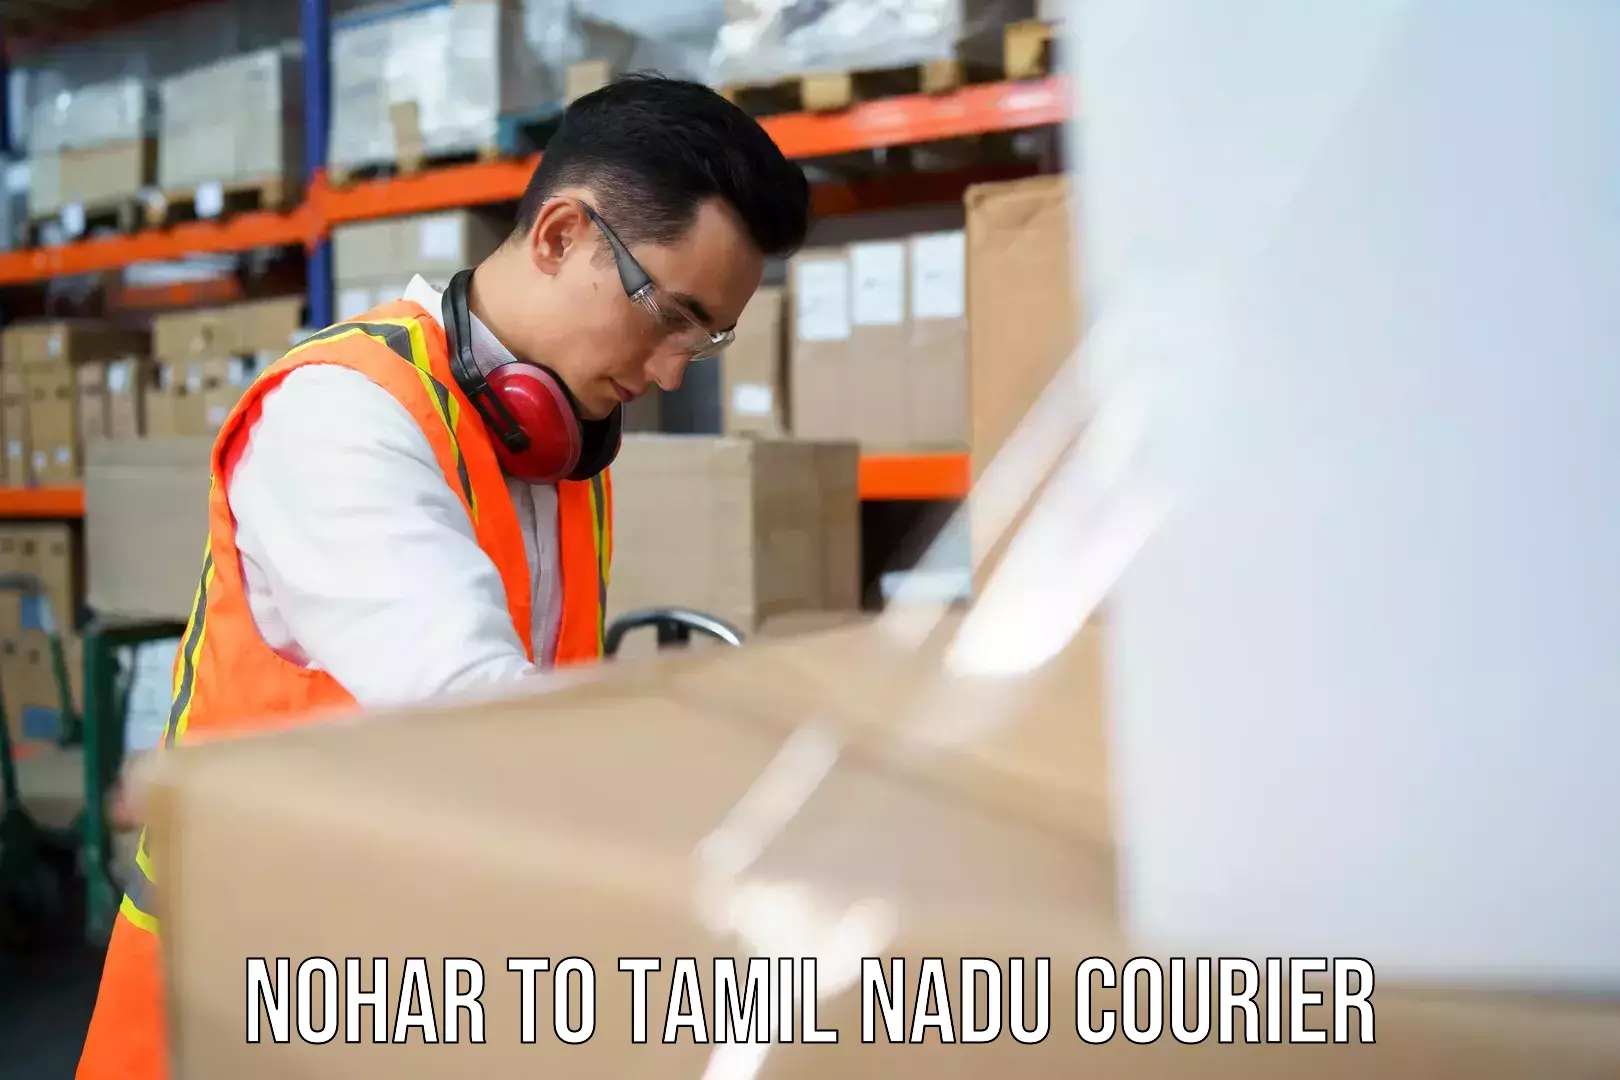 Custom courier solutions Nohar to Tamil Nadu